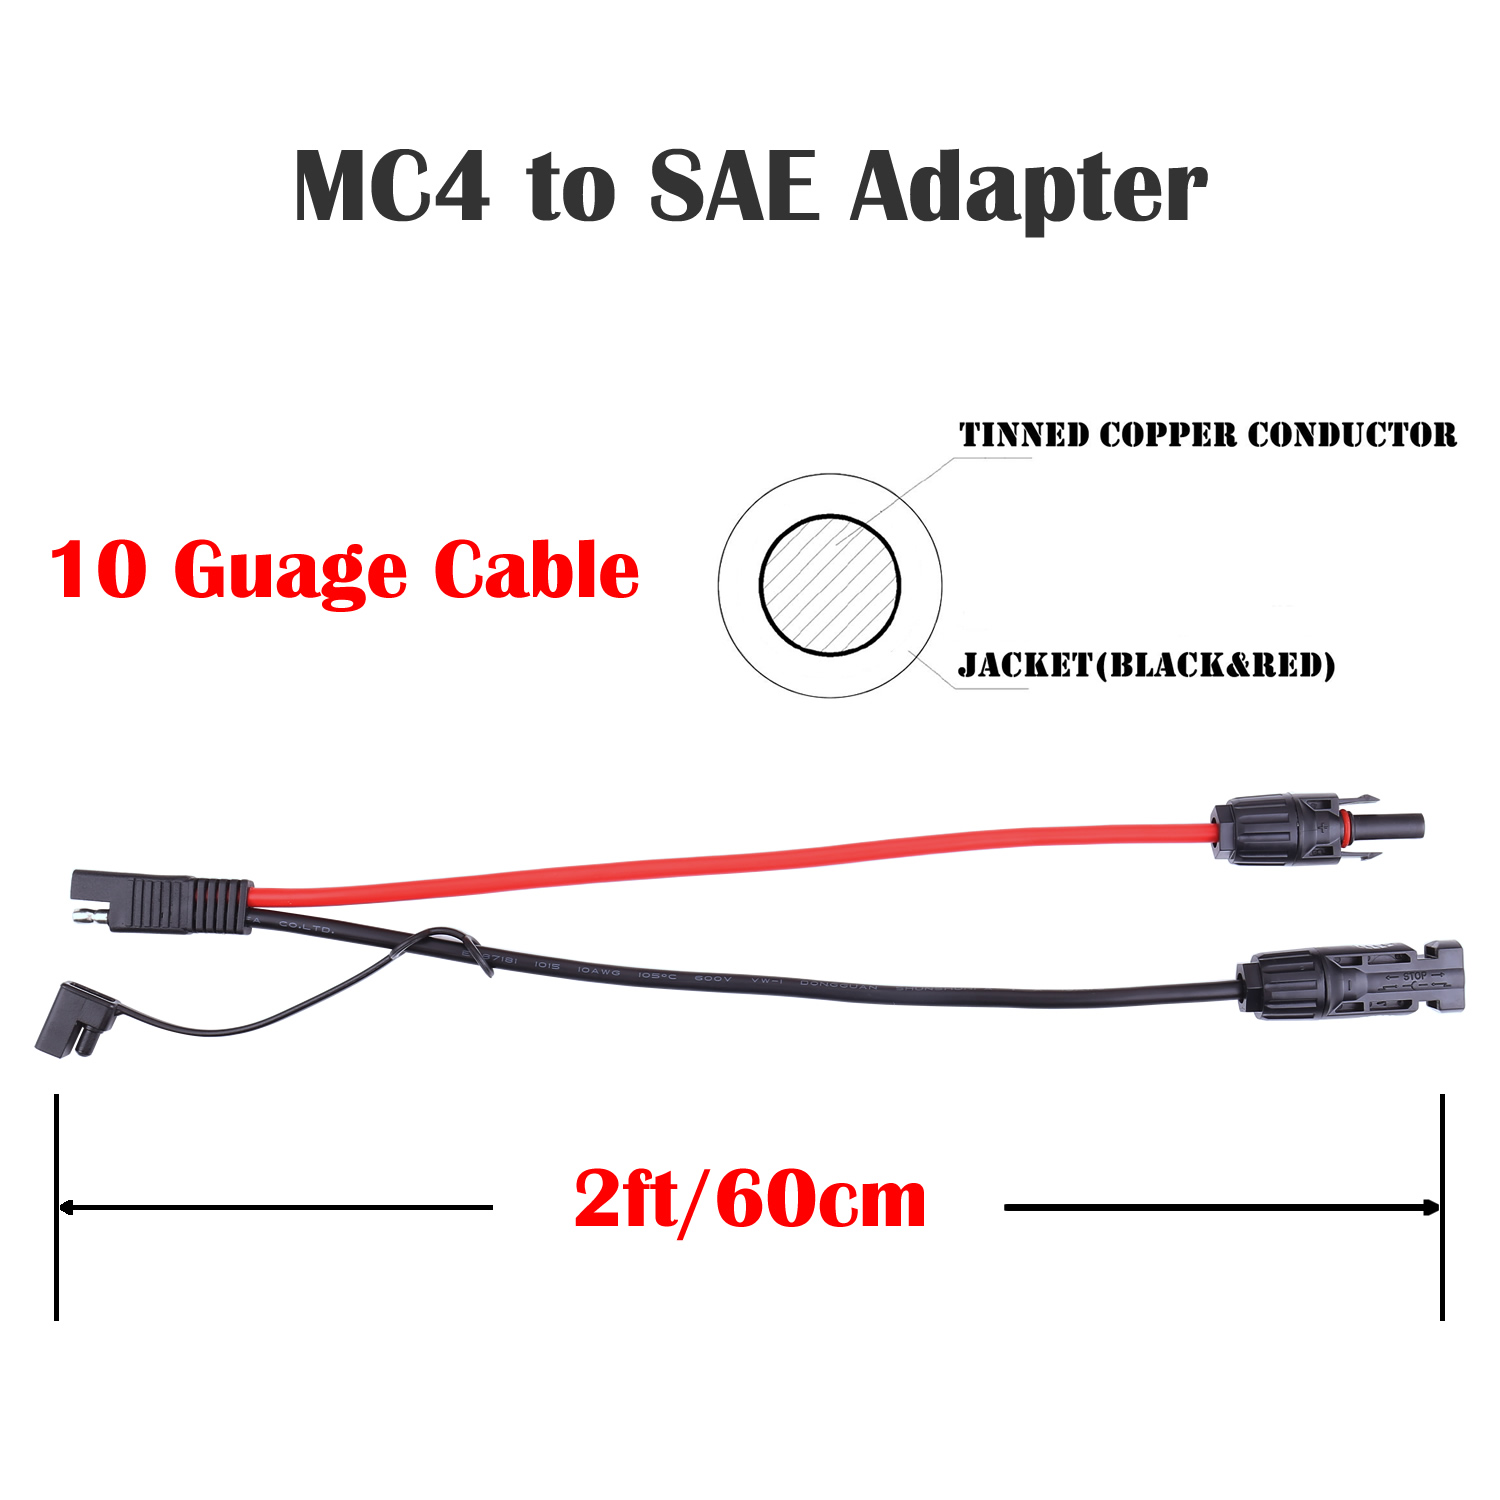 iGreely SAE Plug to DC 5.5mm x 2.1mm Female 14AWG 2ft/60cm Adapters Cables with Sae Polarity Reverse Adapter for Automotive RV Solar Panel SAE Connectors 